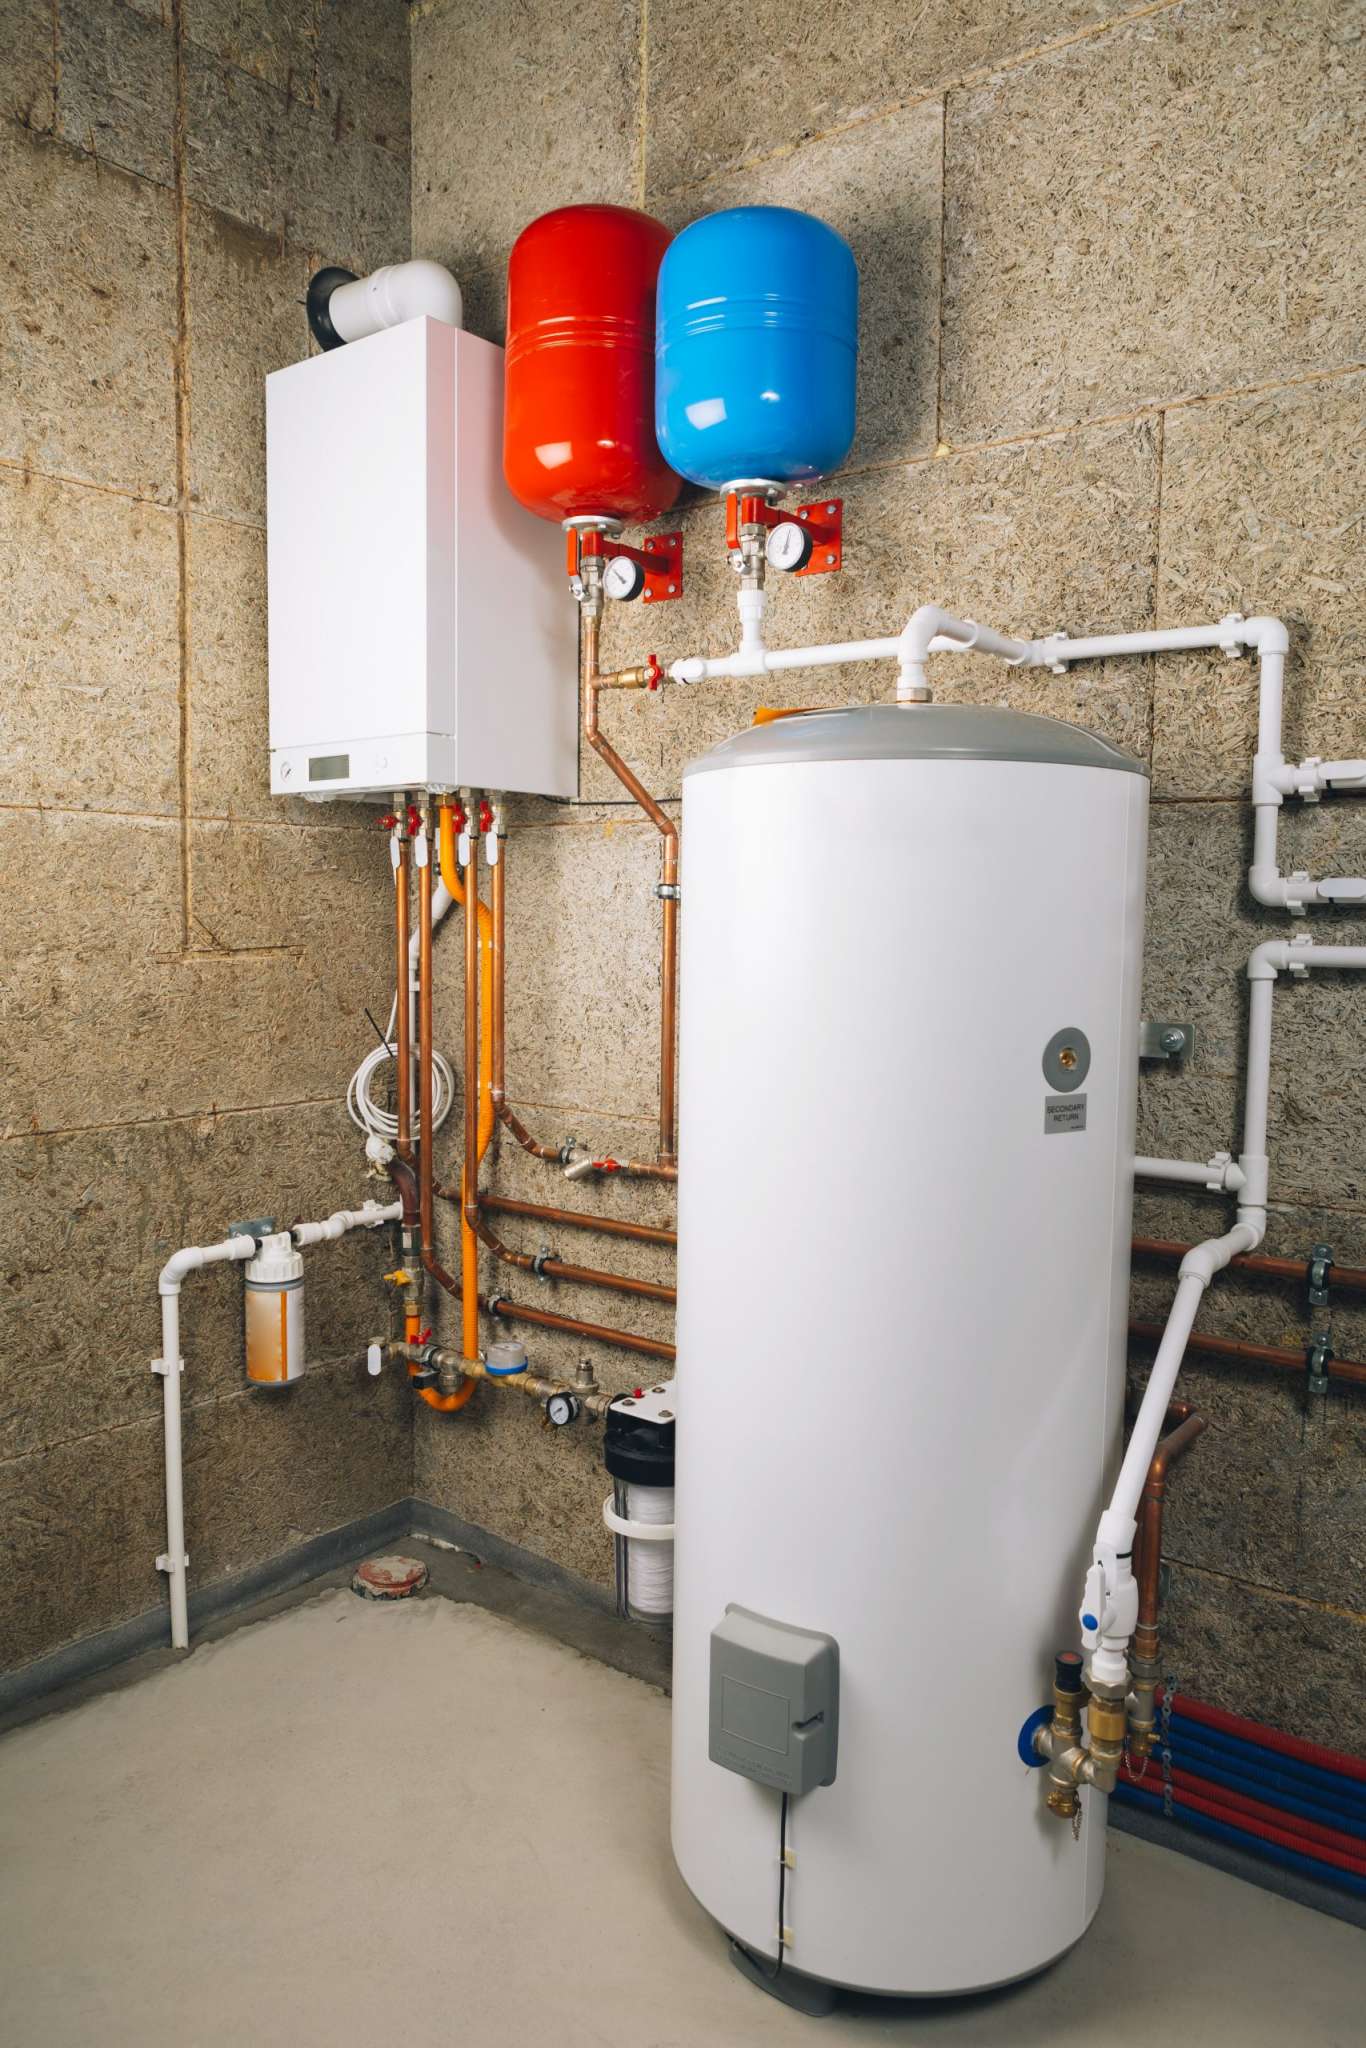 Emergency AC servicing water heaters in Texas